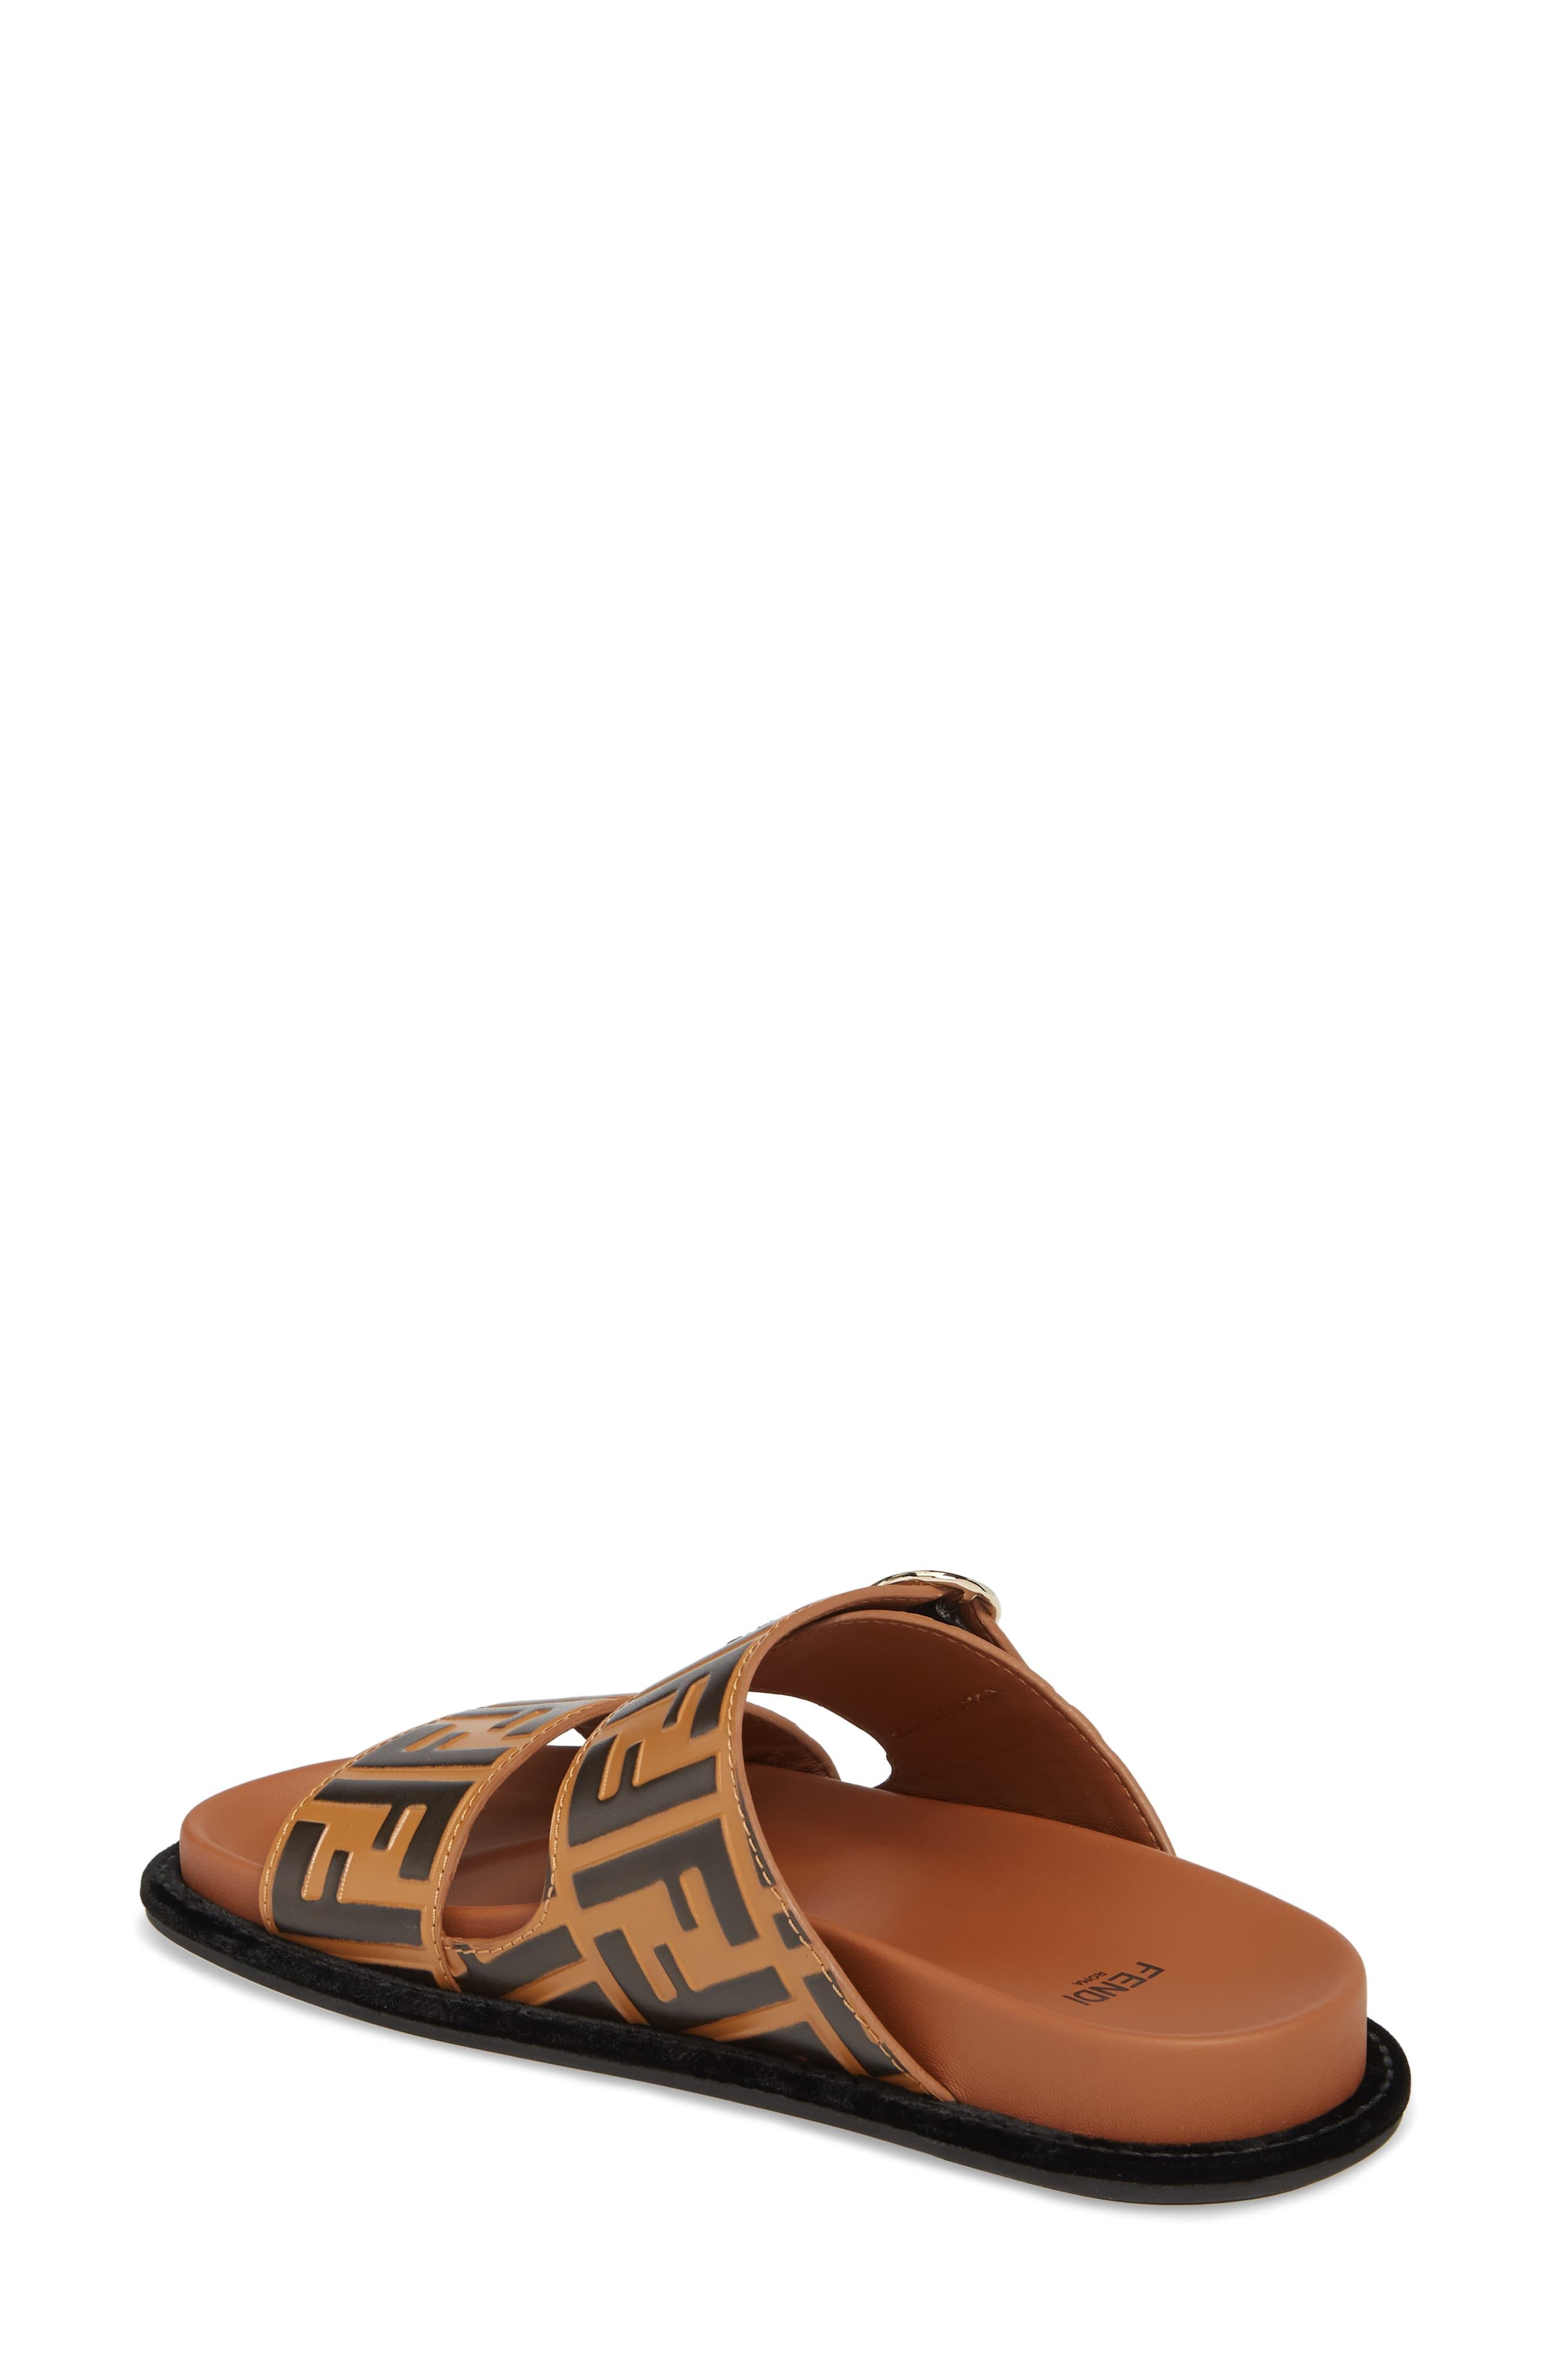 Fendi Leather Pearland Logo Slide Sandal in Brown - Save 35% - Lyst